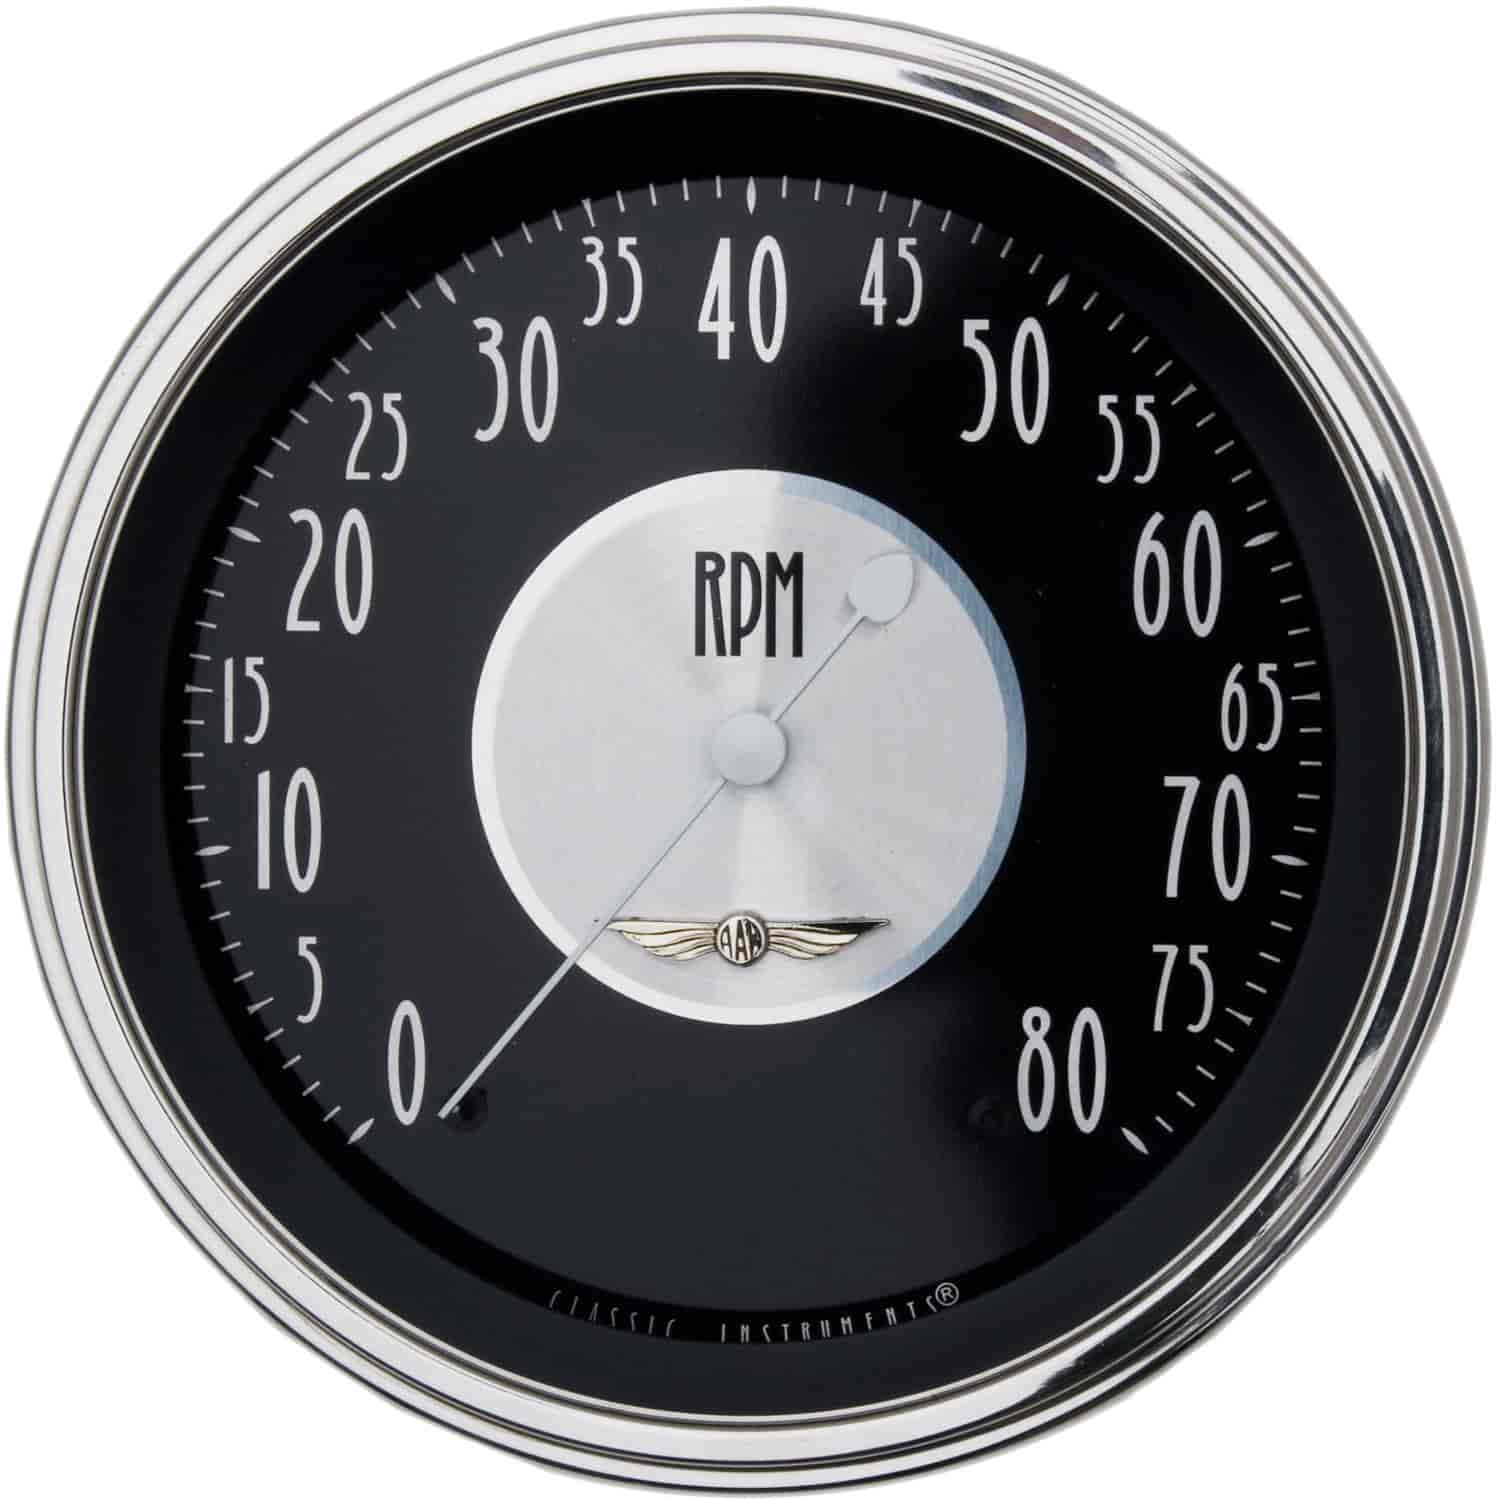 All American Tradition Tachometer 4-5/8" Electrical